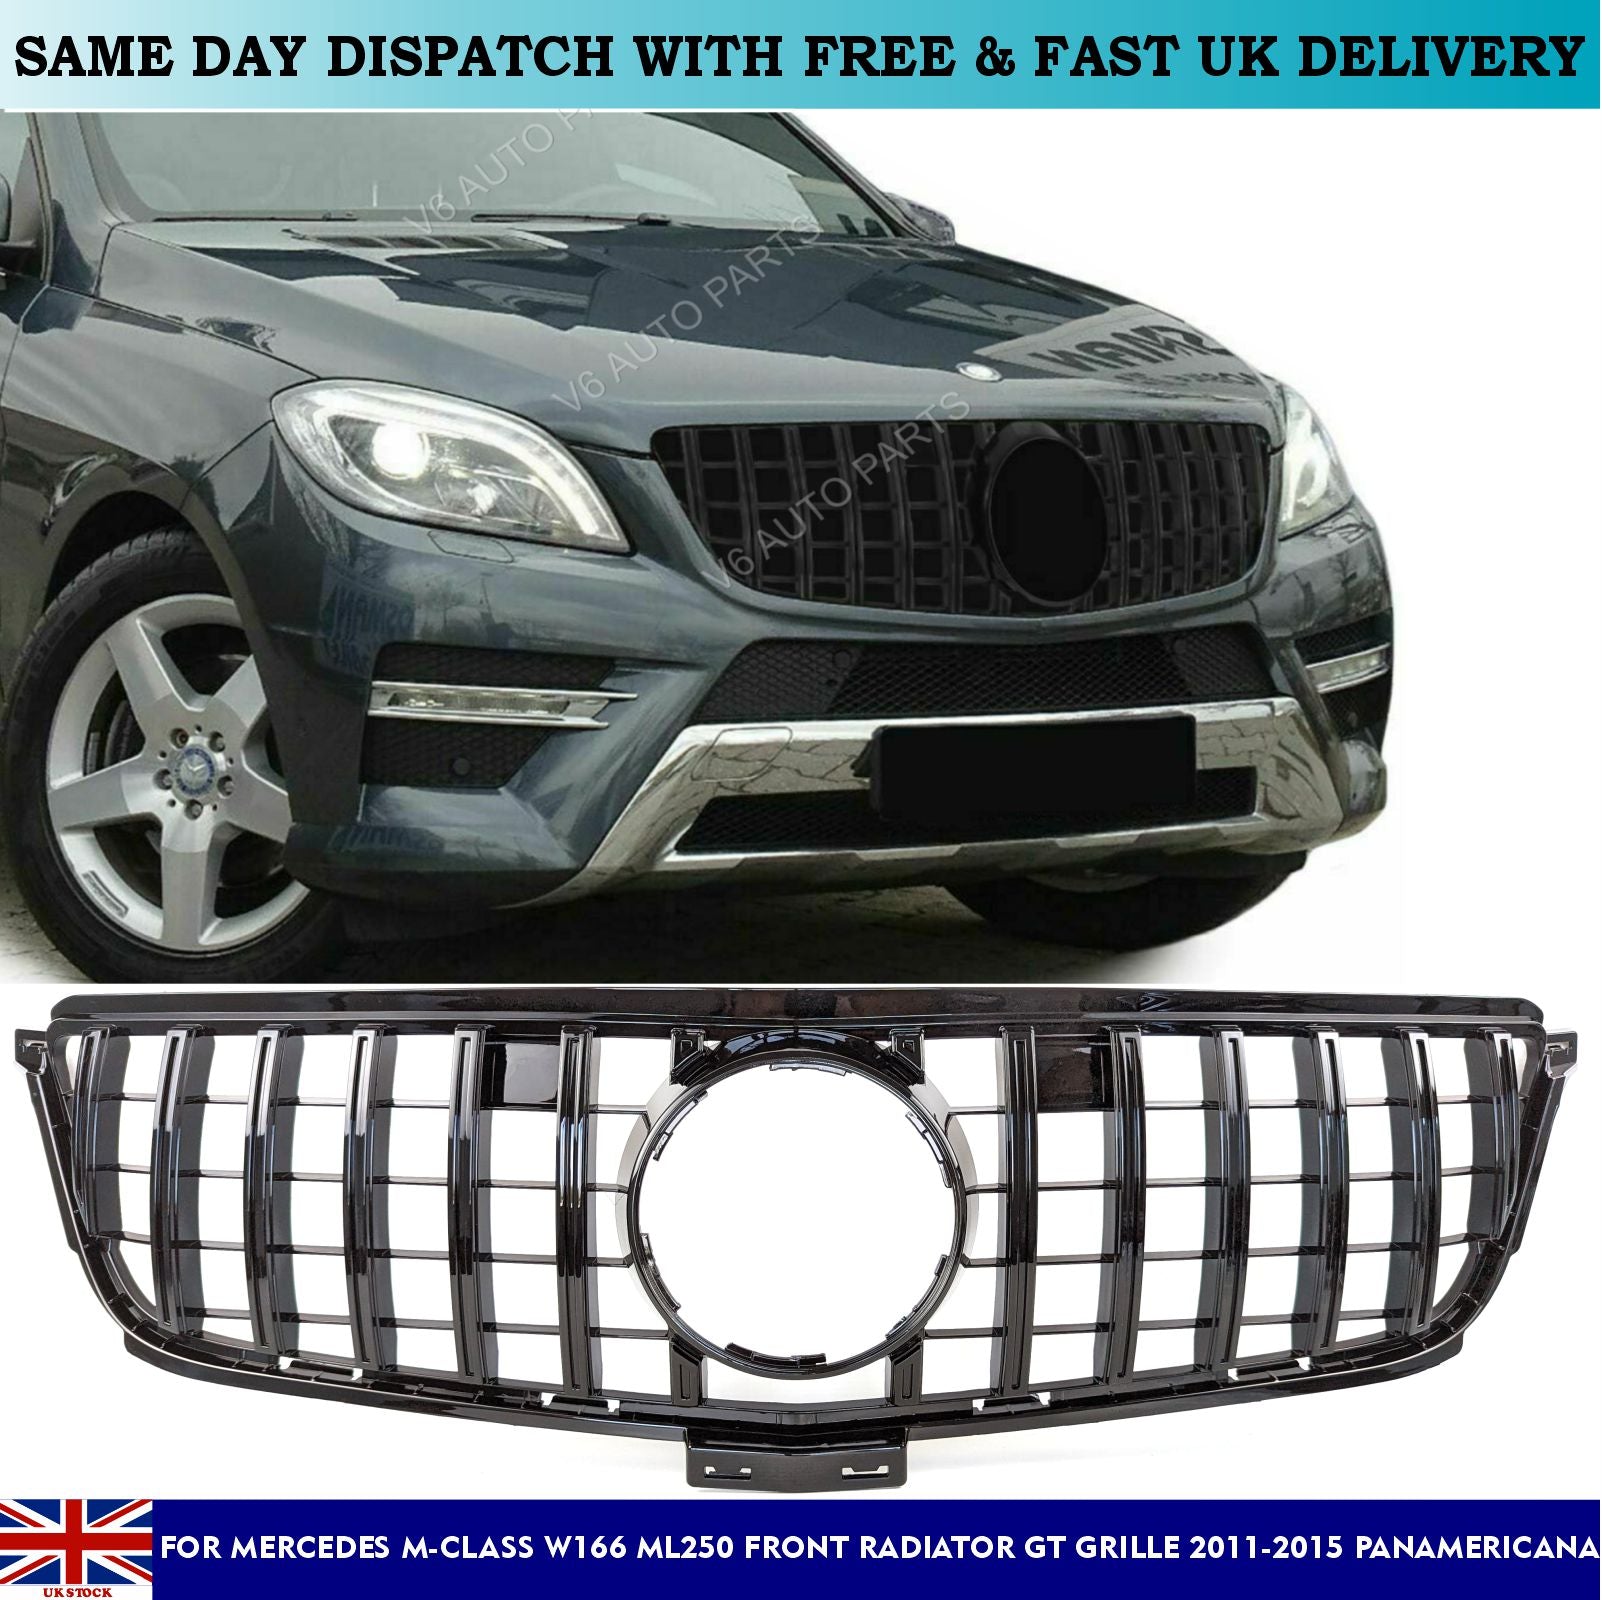 For Mercedes W166 M-Class ML350 Front Radiator GTR Grille 2011-2015 Panamericana